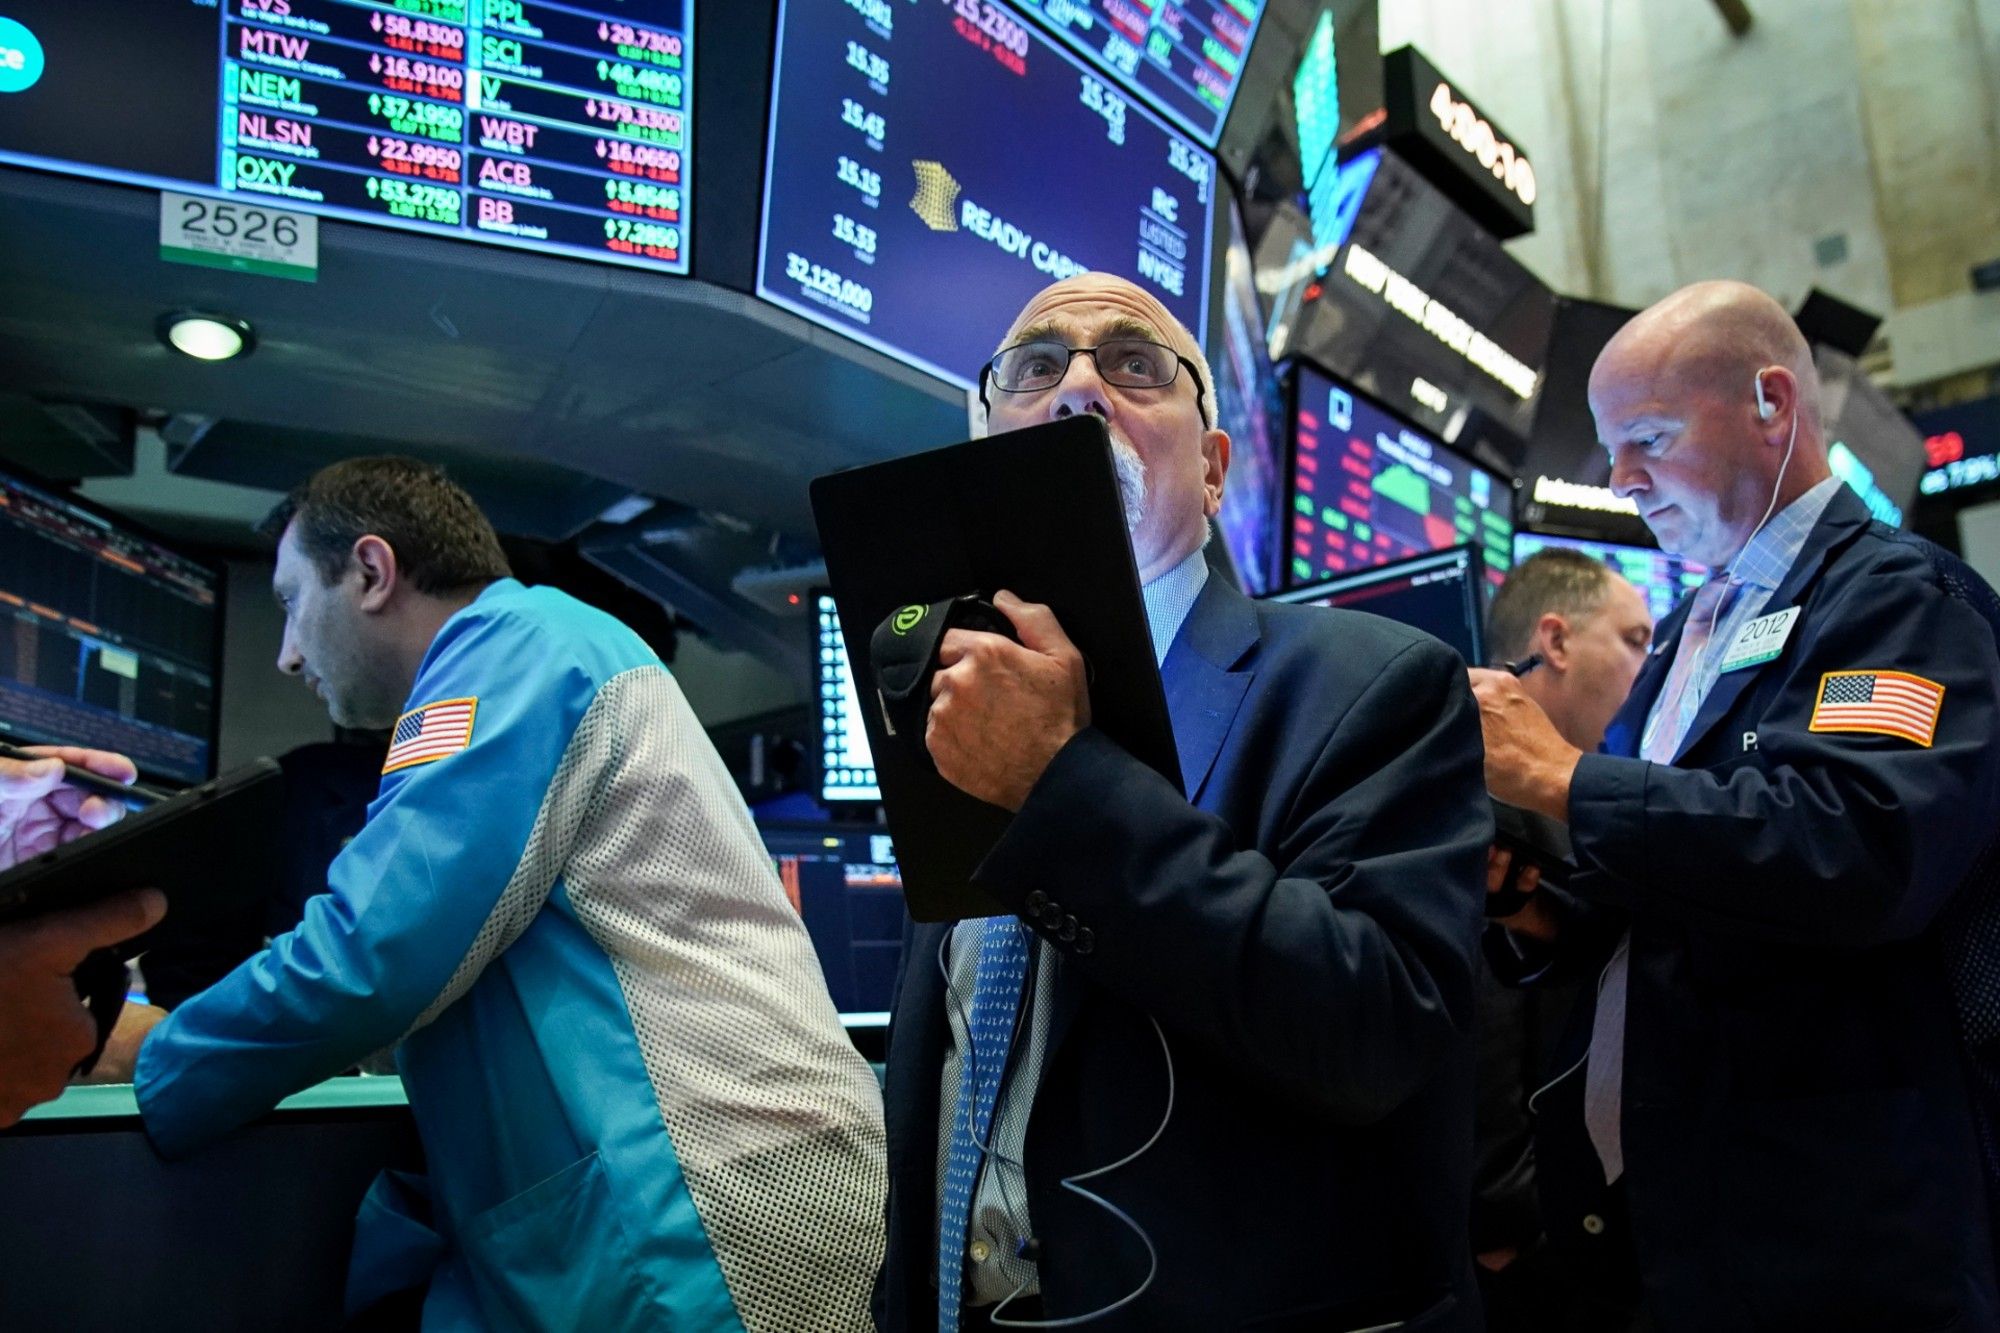 Top Stock Market News For Today May 3, 2022 : StockMarket.com